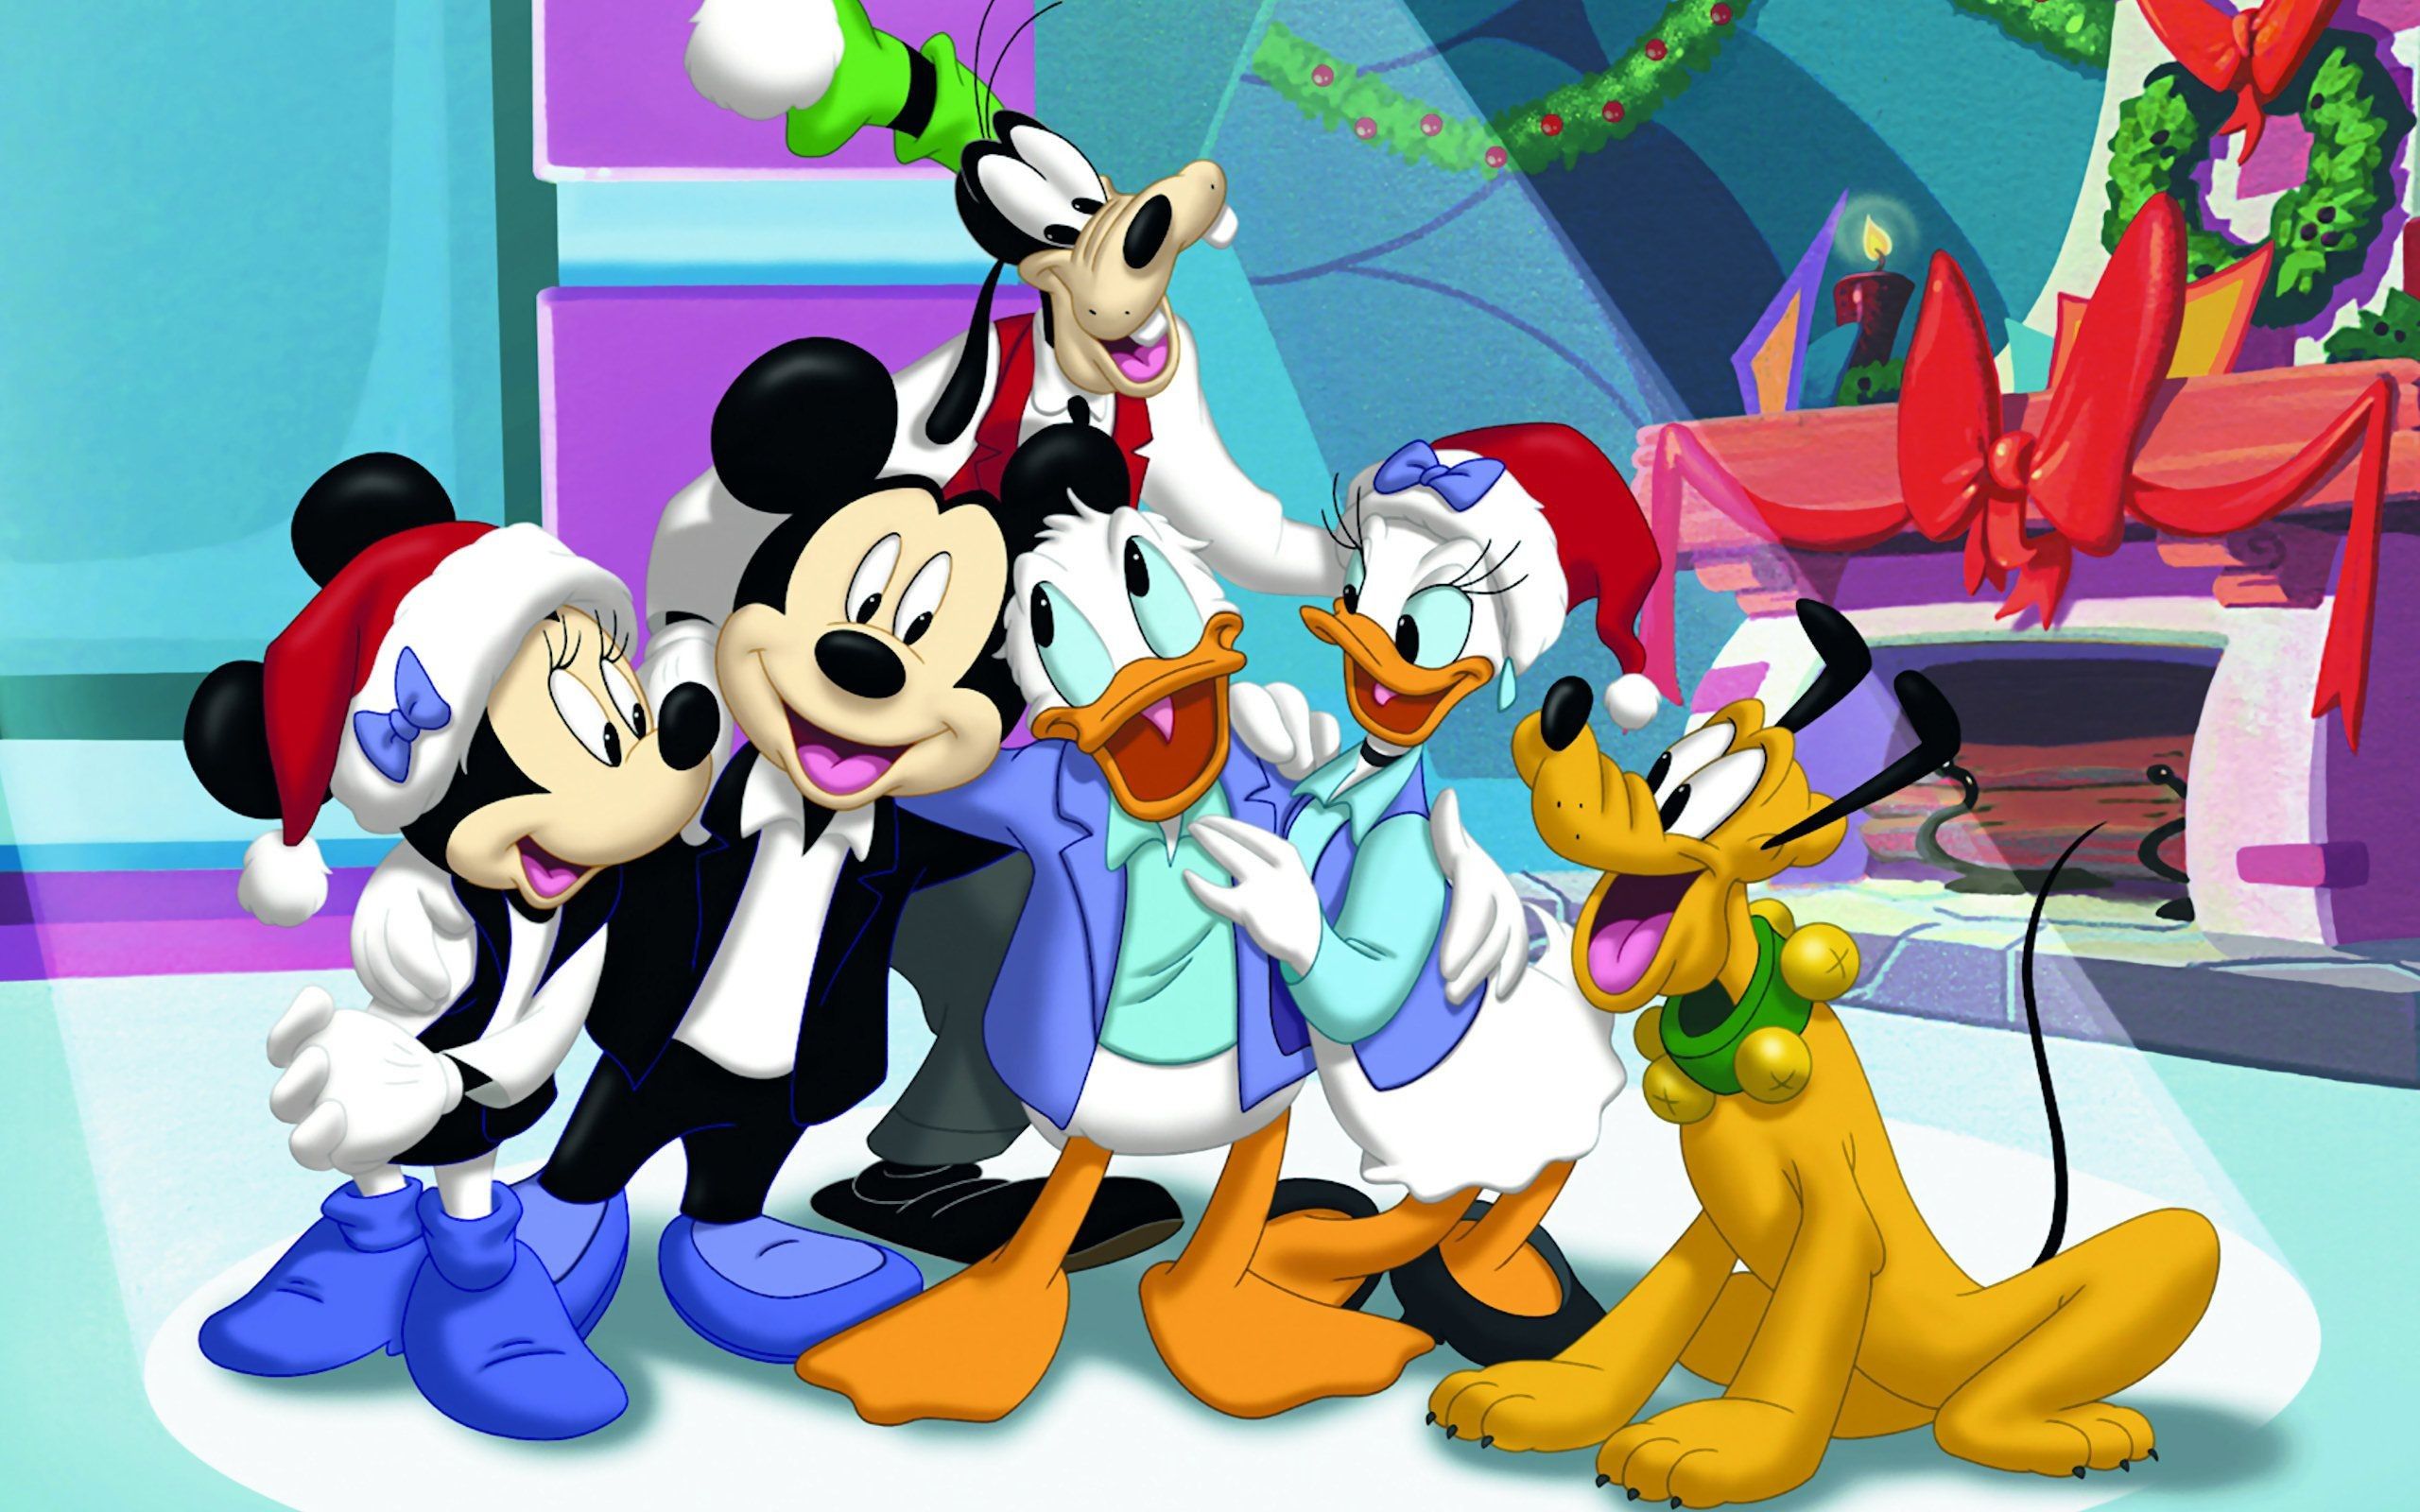 Mickey Mouse Christmas Celebration With Friends Wallpaper HD, Wallpaper13.com